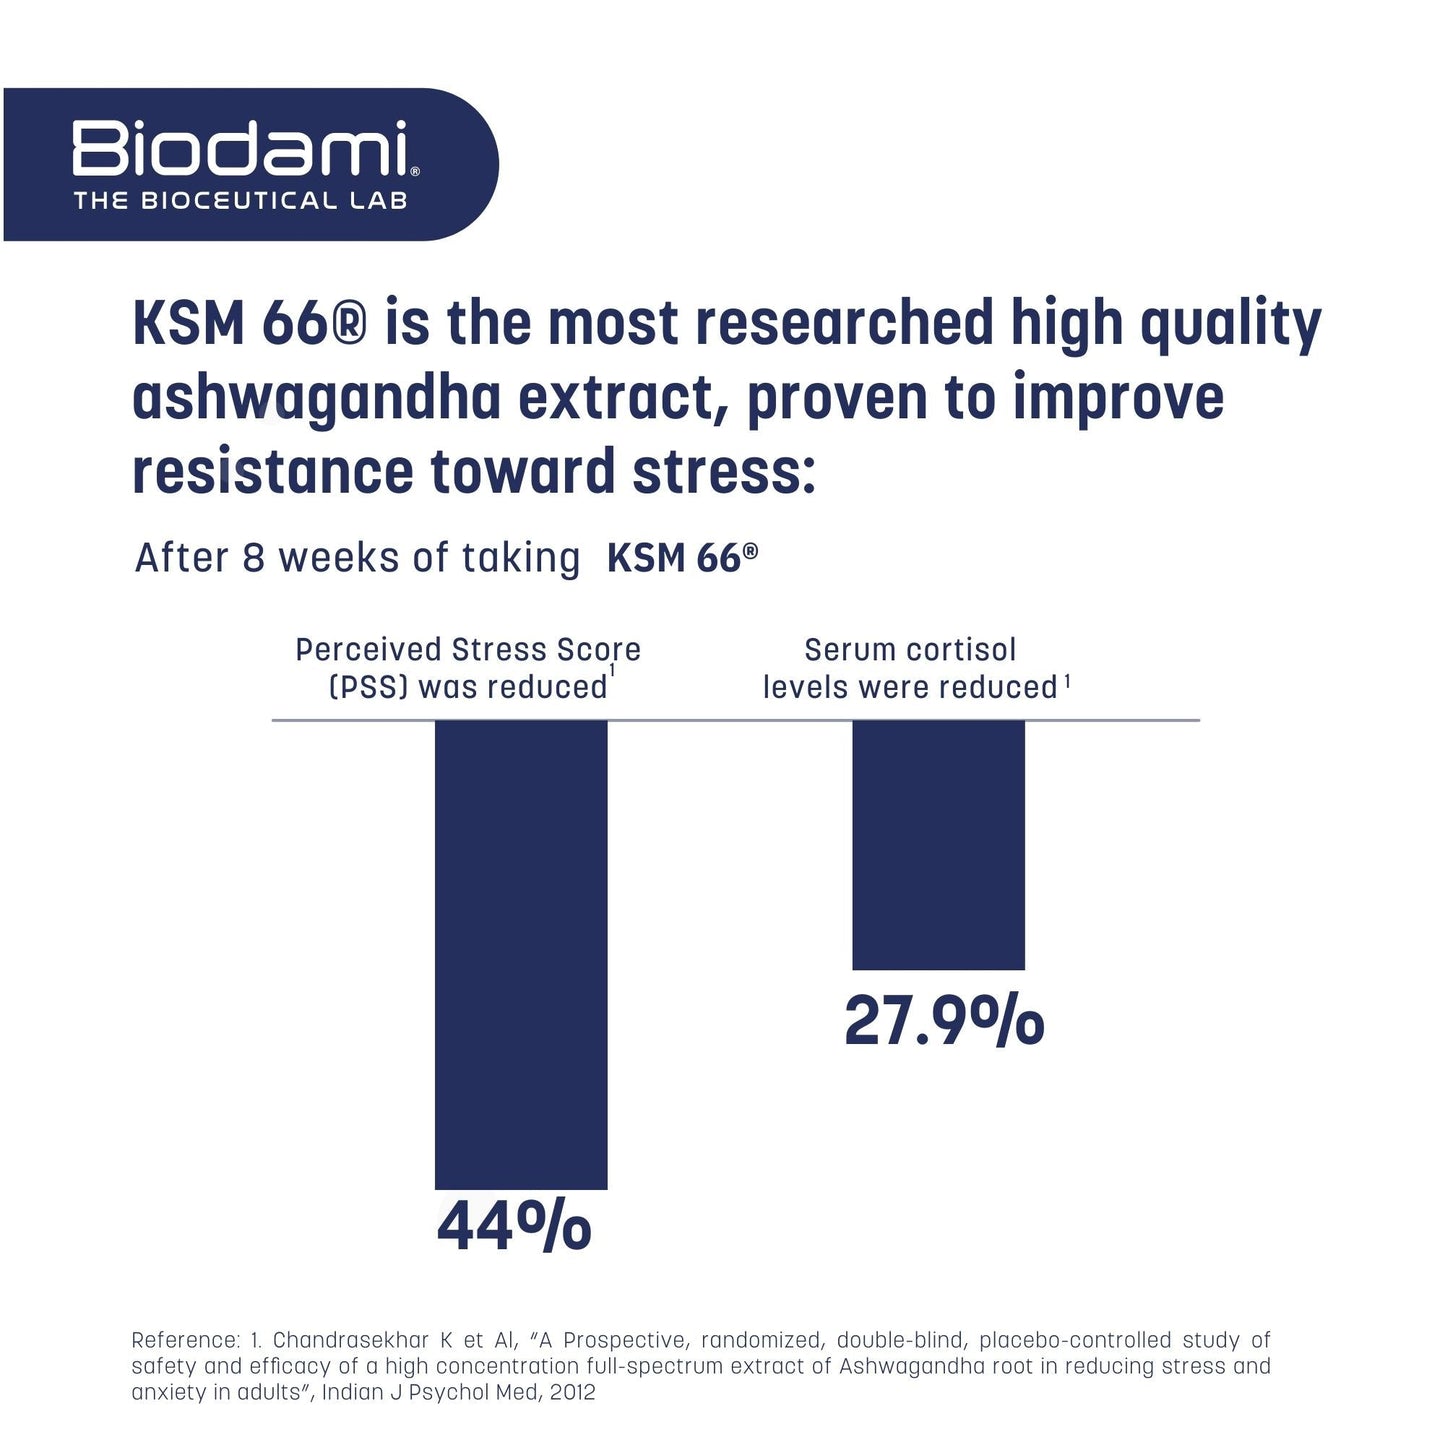 Graph of KSM 66 is most researched Ashwagandha showing it reduced stress and reduced serum cortisol levels only after 8 weeks